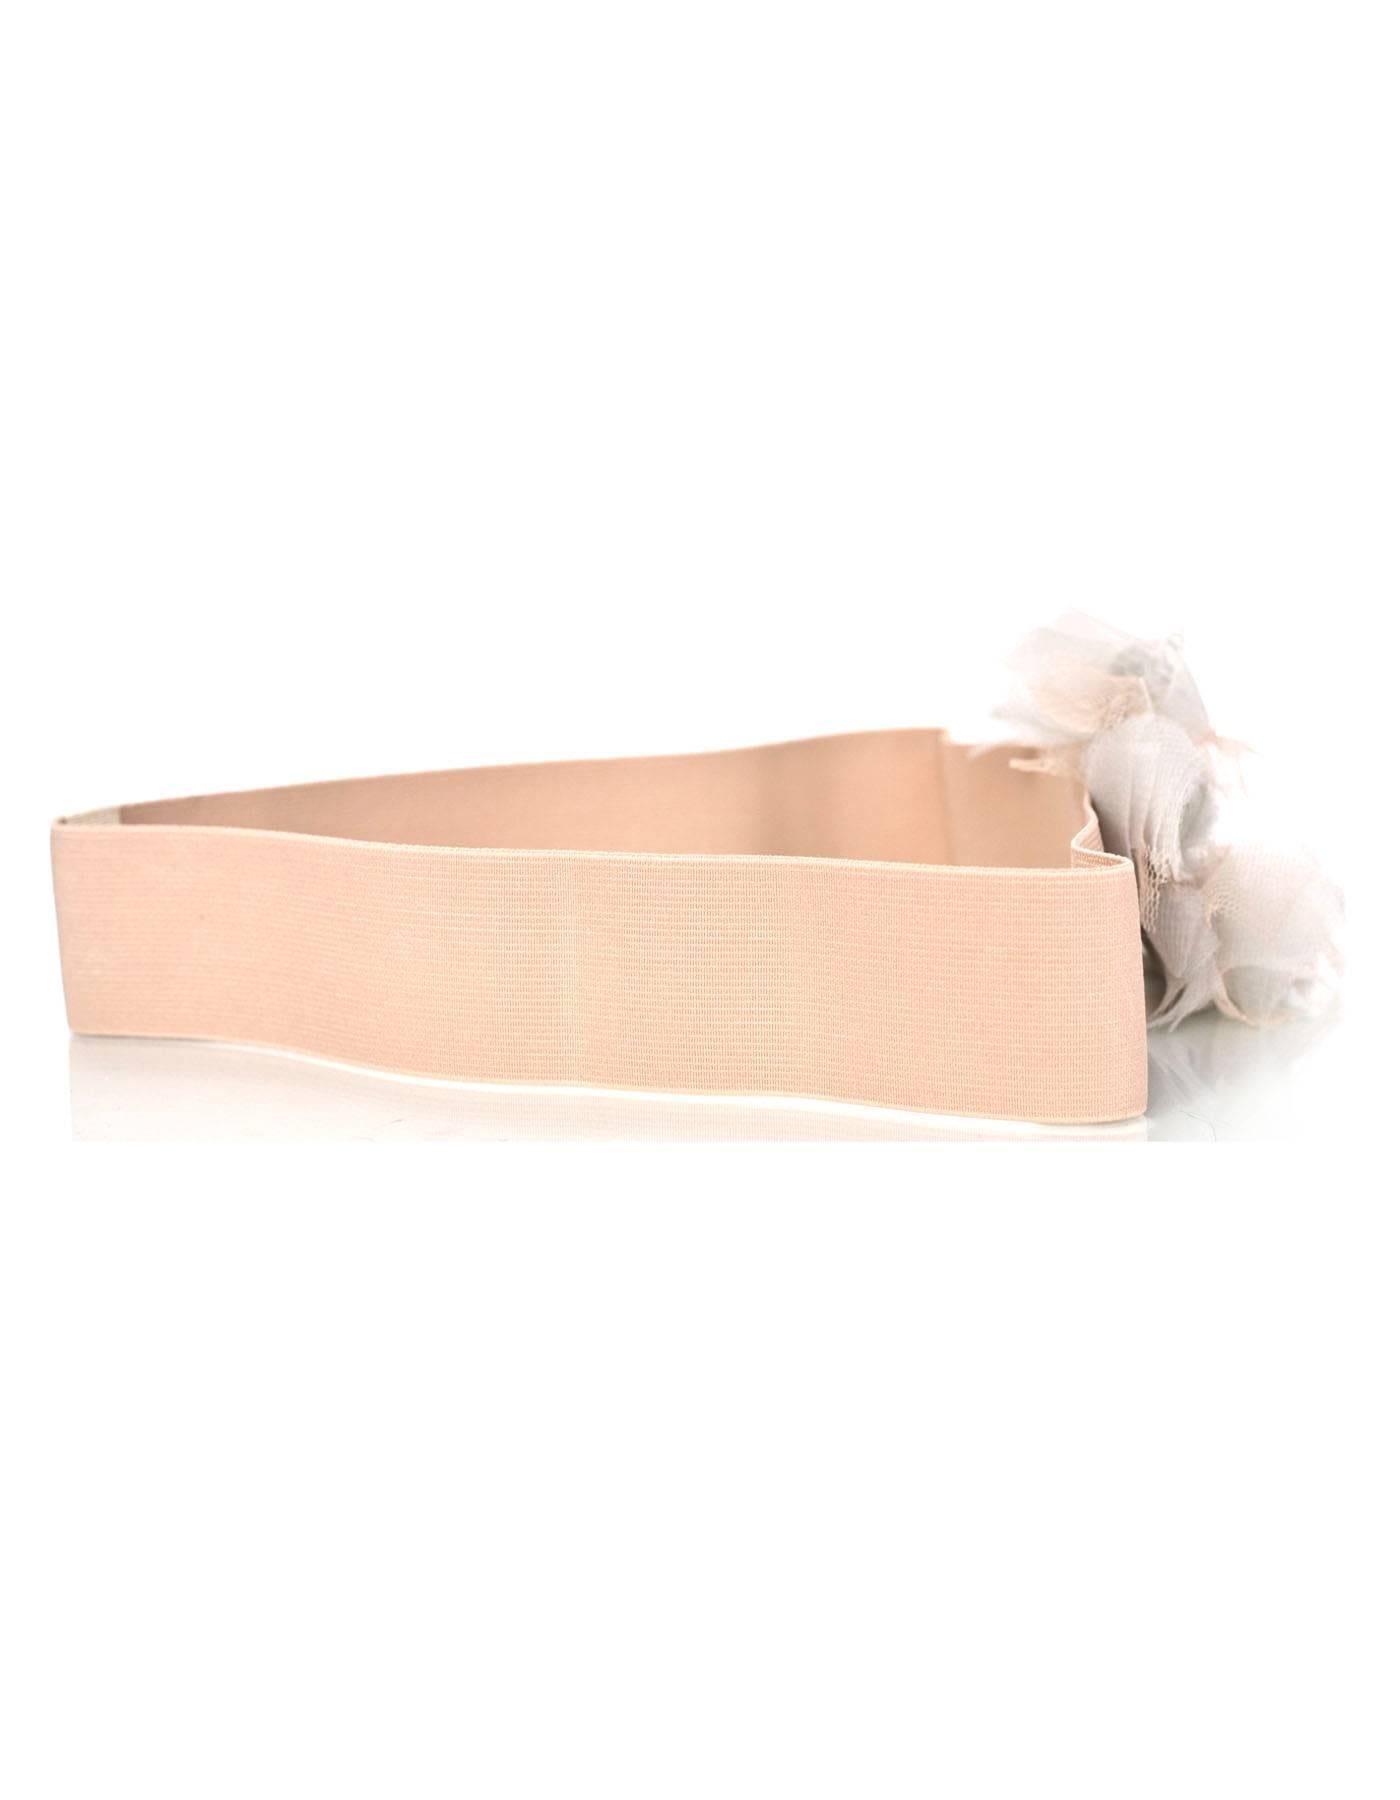 Lanvin Blush Elastic Belt 
Features pale blue tulle flower

Made In: France
Color: Blush and pale blue
Materials: Elastic and tulle
Closure/Opening: Double snap closure
Stamp: Lanvin Made in France
Overall Condition: Excellent pre-owned condition